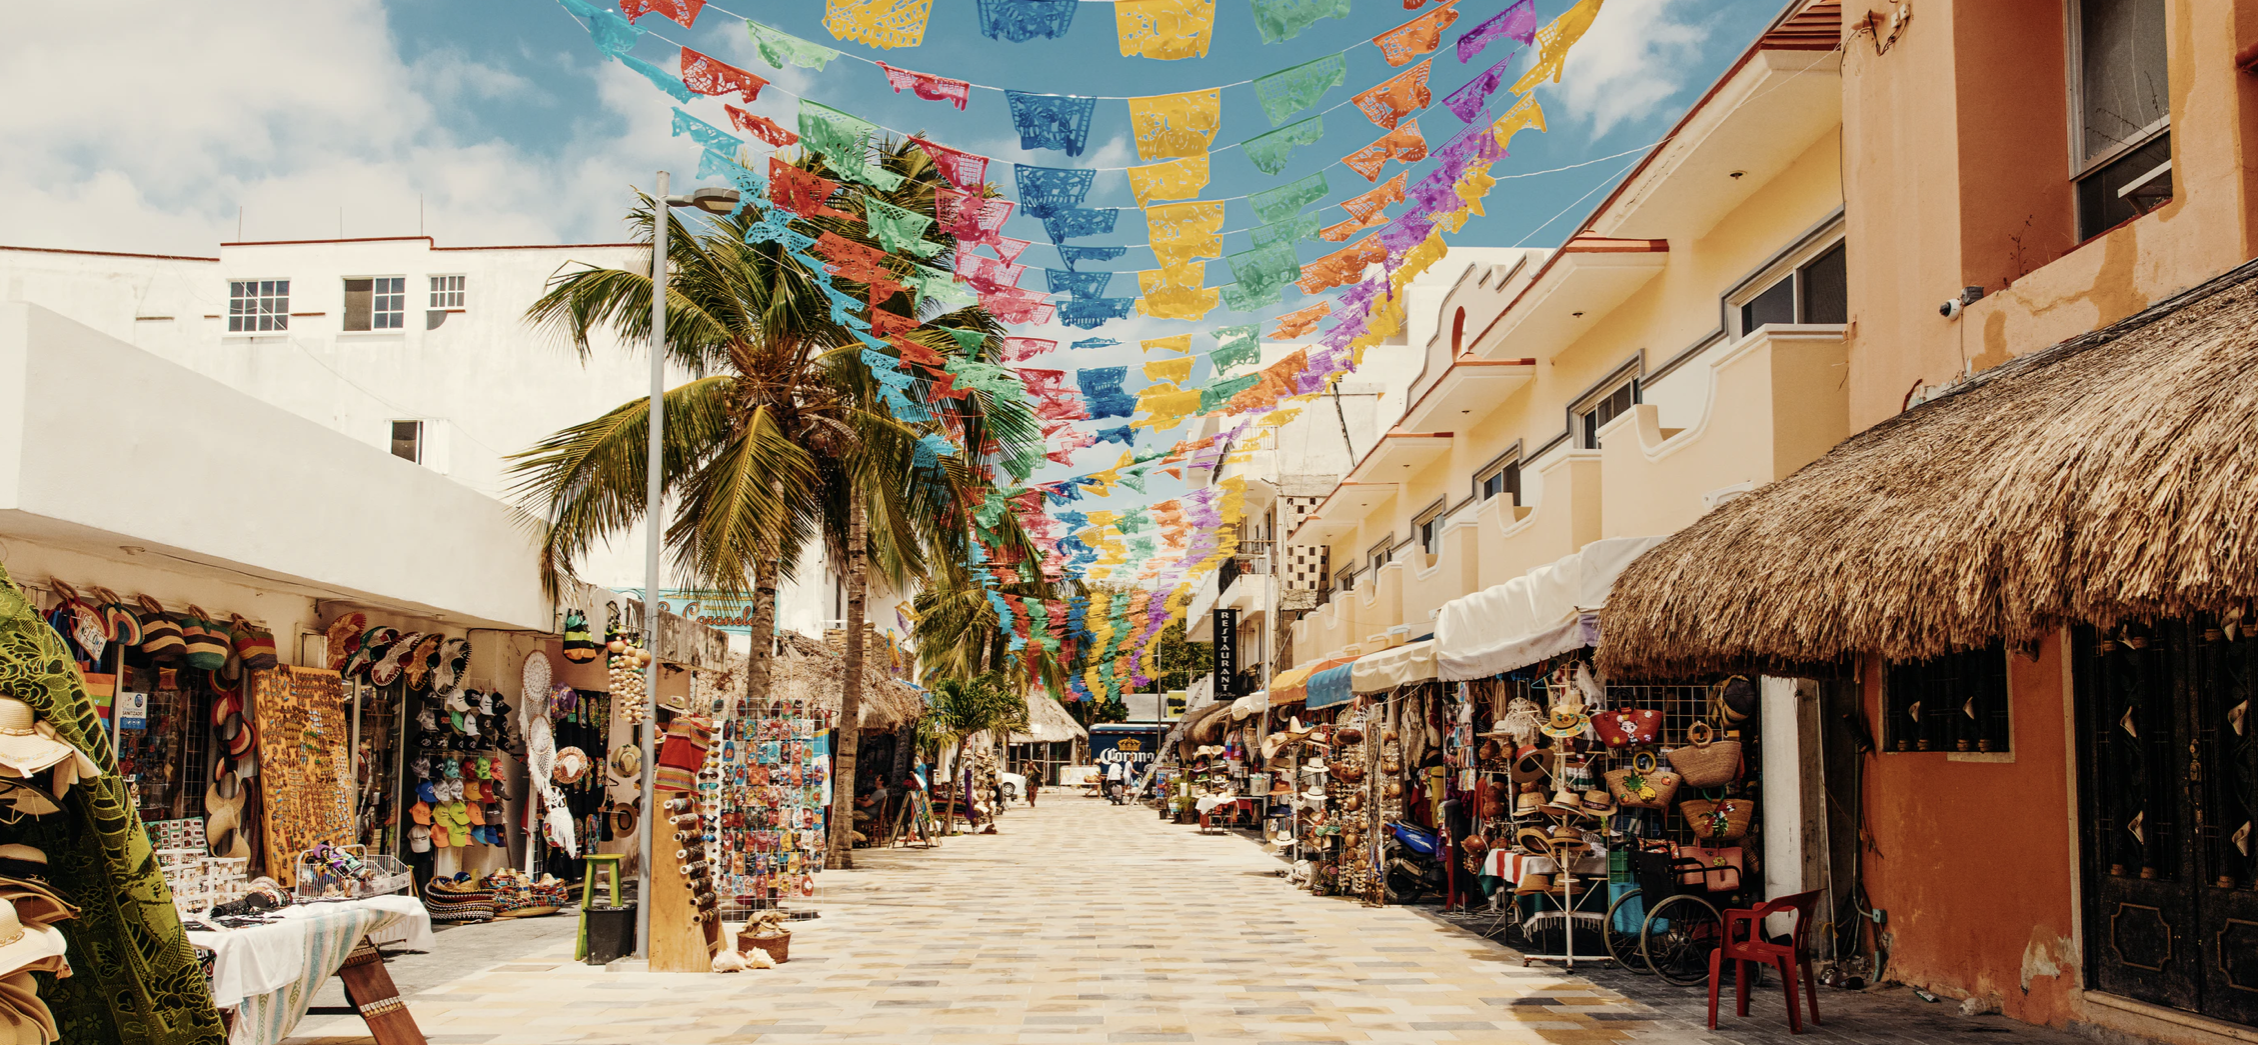 Things to do in Cozumel 2022